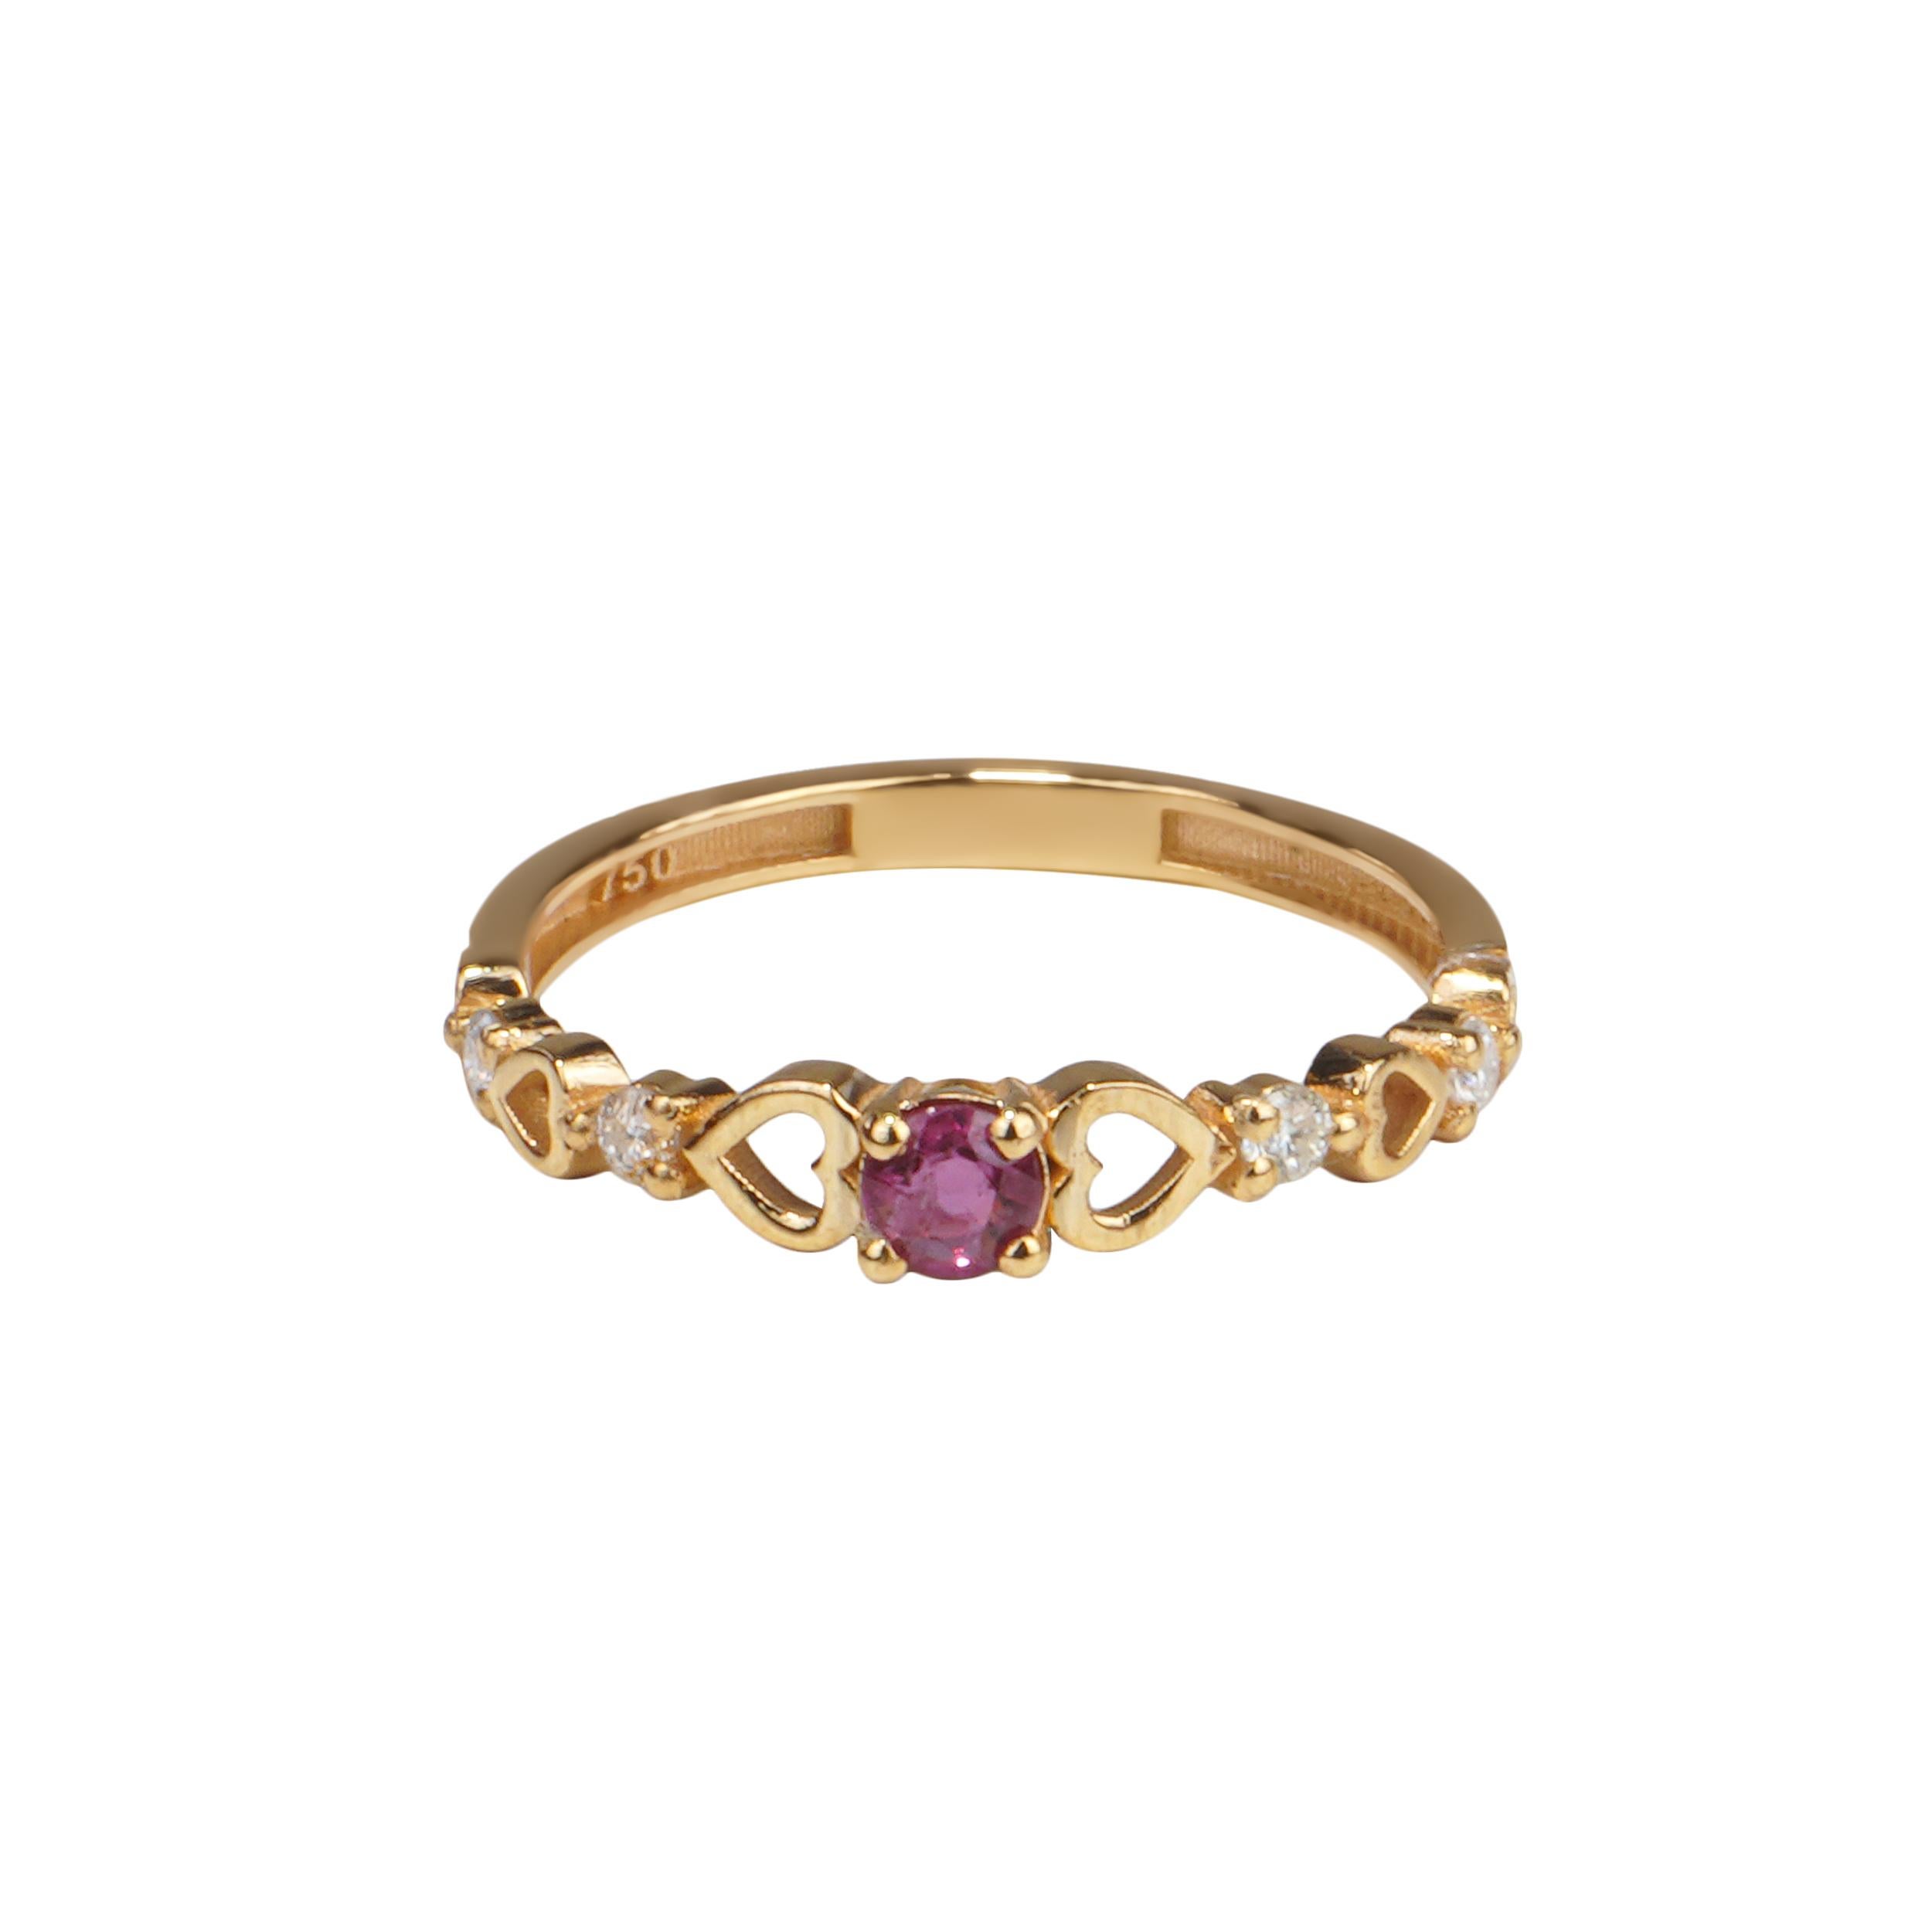 🌟 Introducing the 18K Solid Gold Sweetheart Ruby Ring! 🌟

Are you ready to make a statement? Elevate your style with our exquisite 18K Solid Gold Sweetheart Ruby Ring. Crafted with love and precision, this stunning piece is perfect for those who